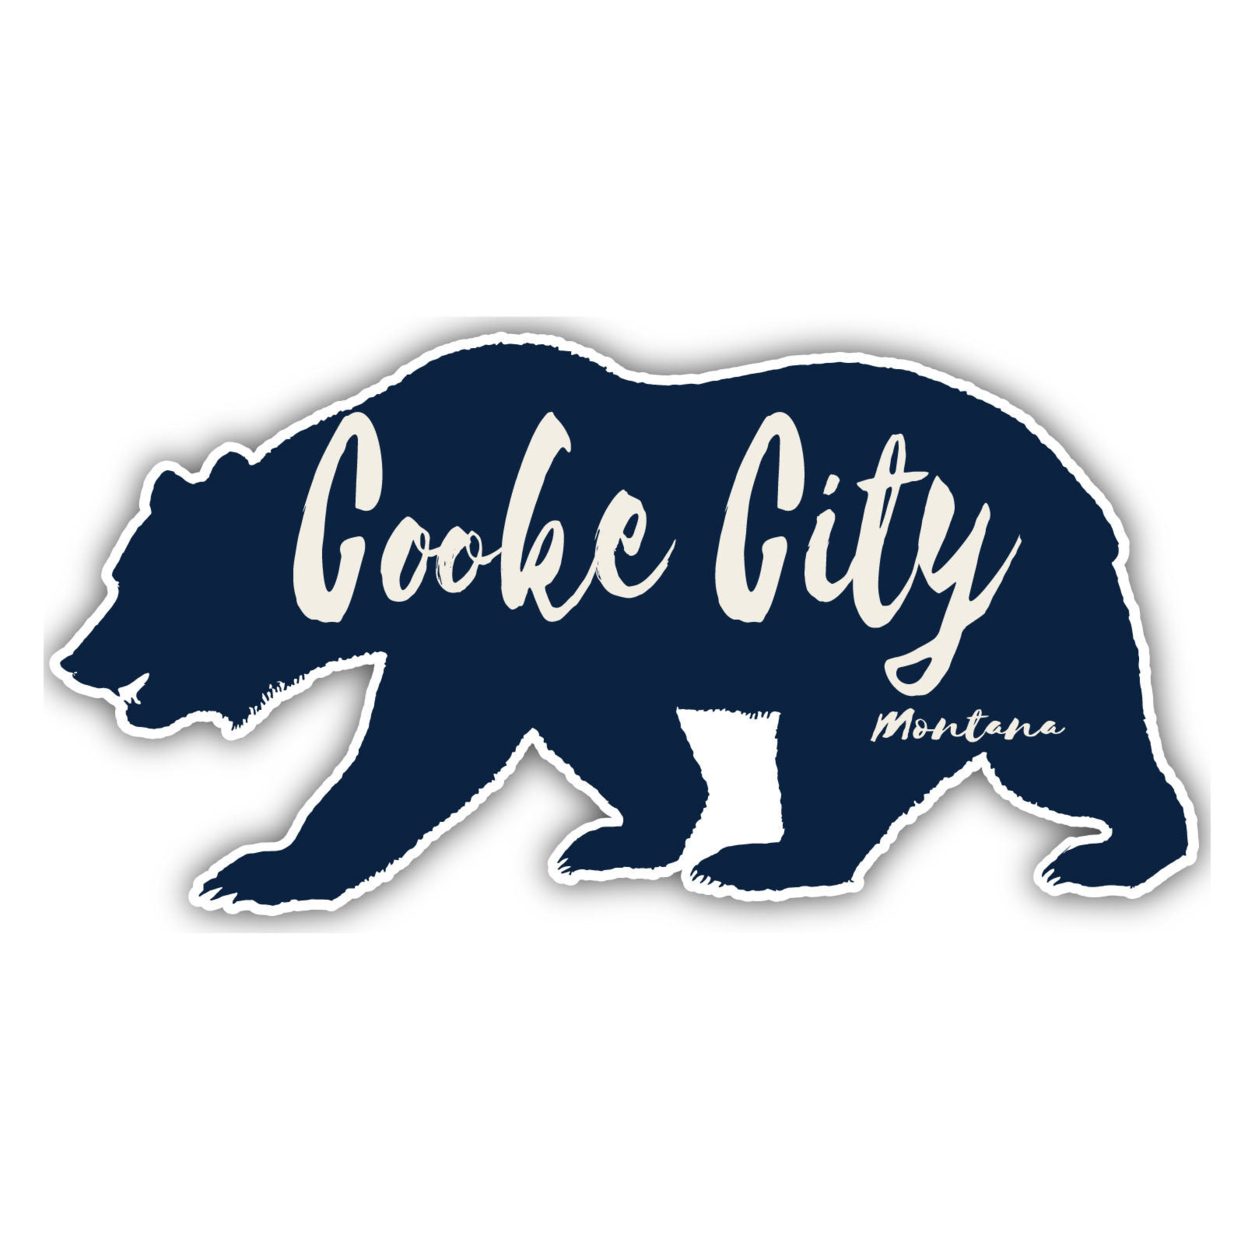 Cooke City Montana Souvenir Decorative Stickers (Choose Theme And Size) - Single Unit, 4-Inch, Great Outdoors